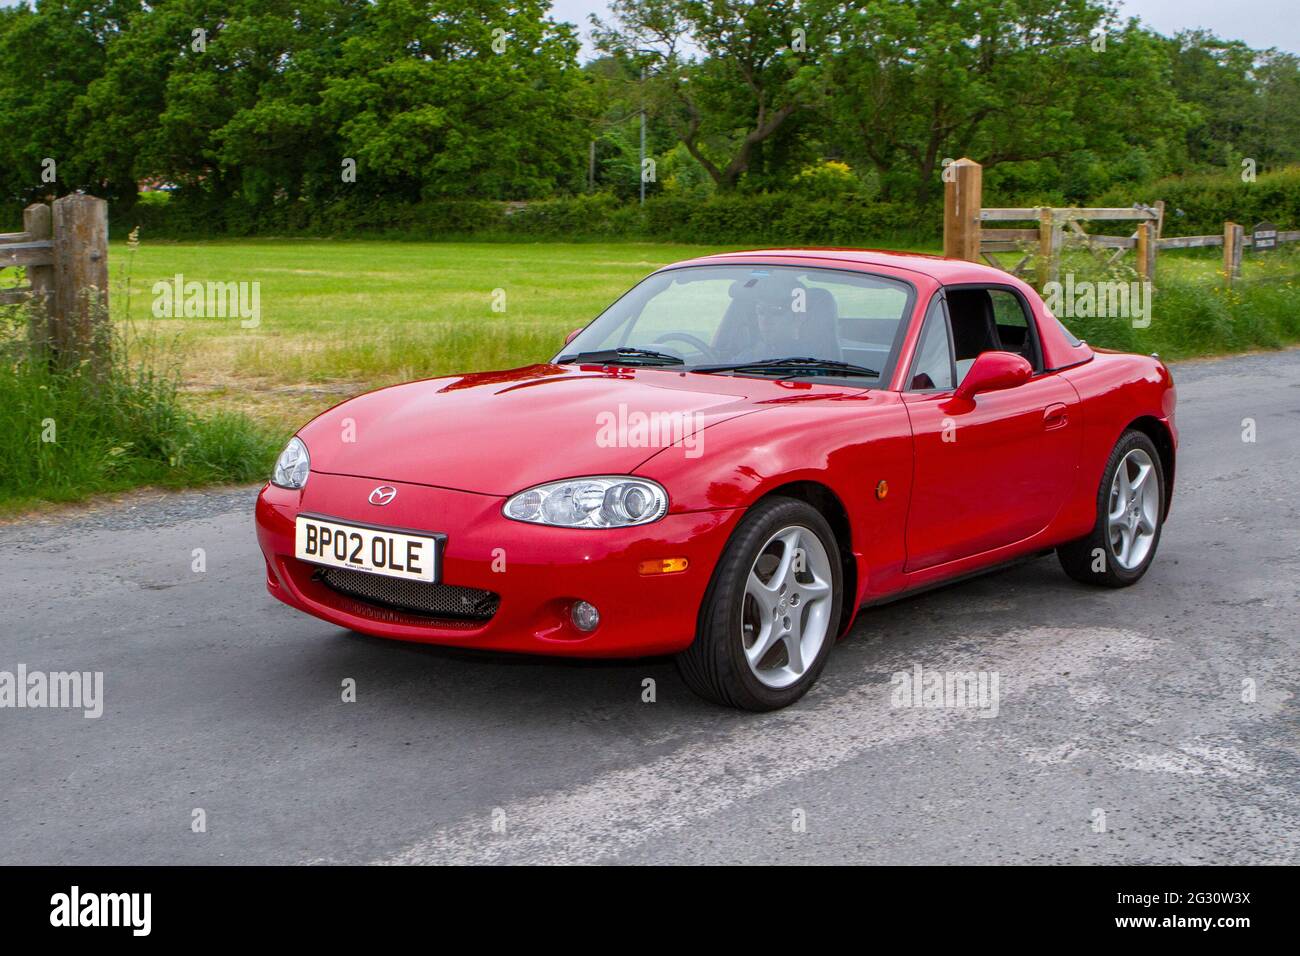 2002 red Mazda Sport 1840cc petrol roadster ar the 58th Annual Manchester to Blackpool Vintage & Classic Car Run The event is a ‘Touring Assembly’ Stock Photo